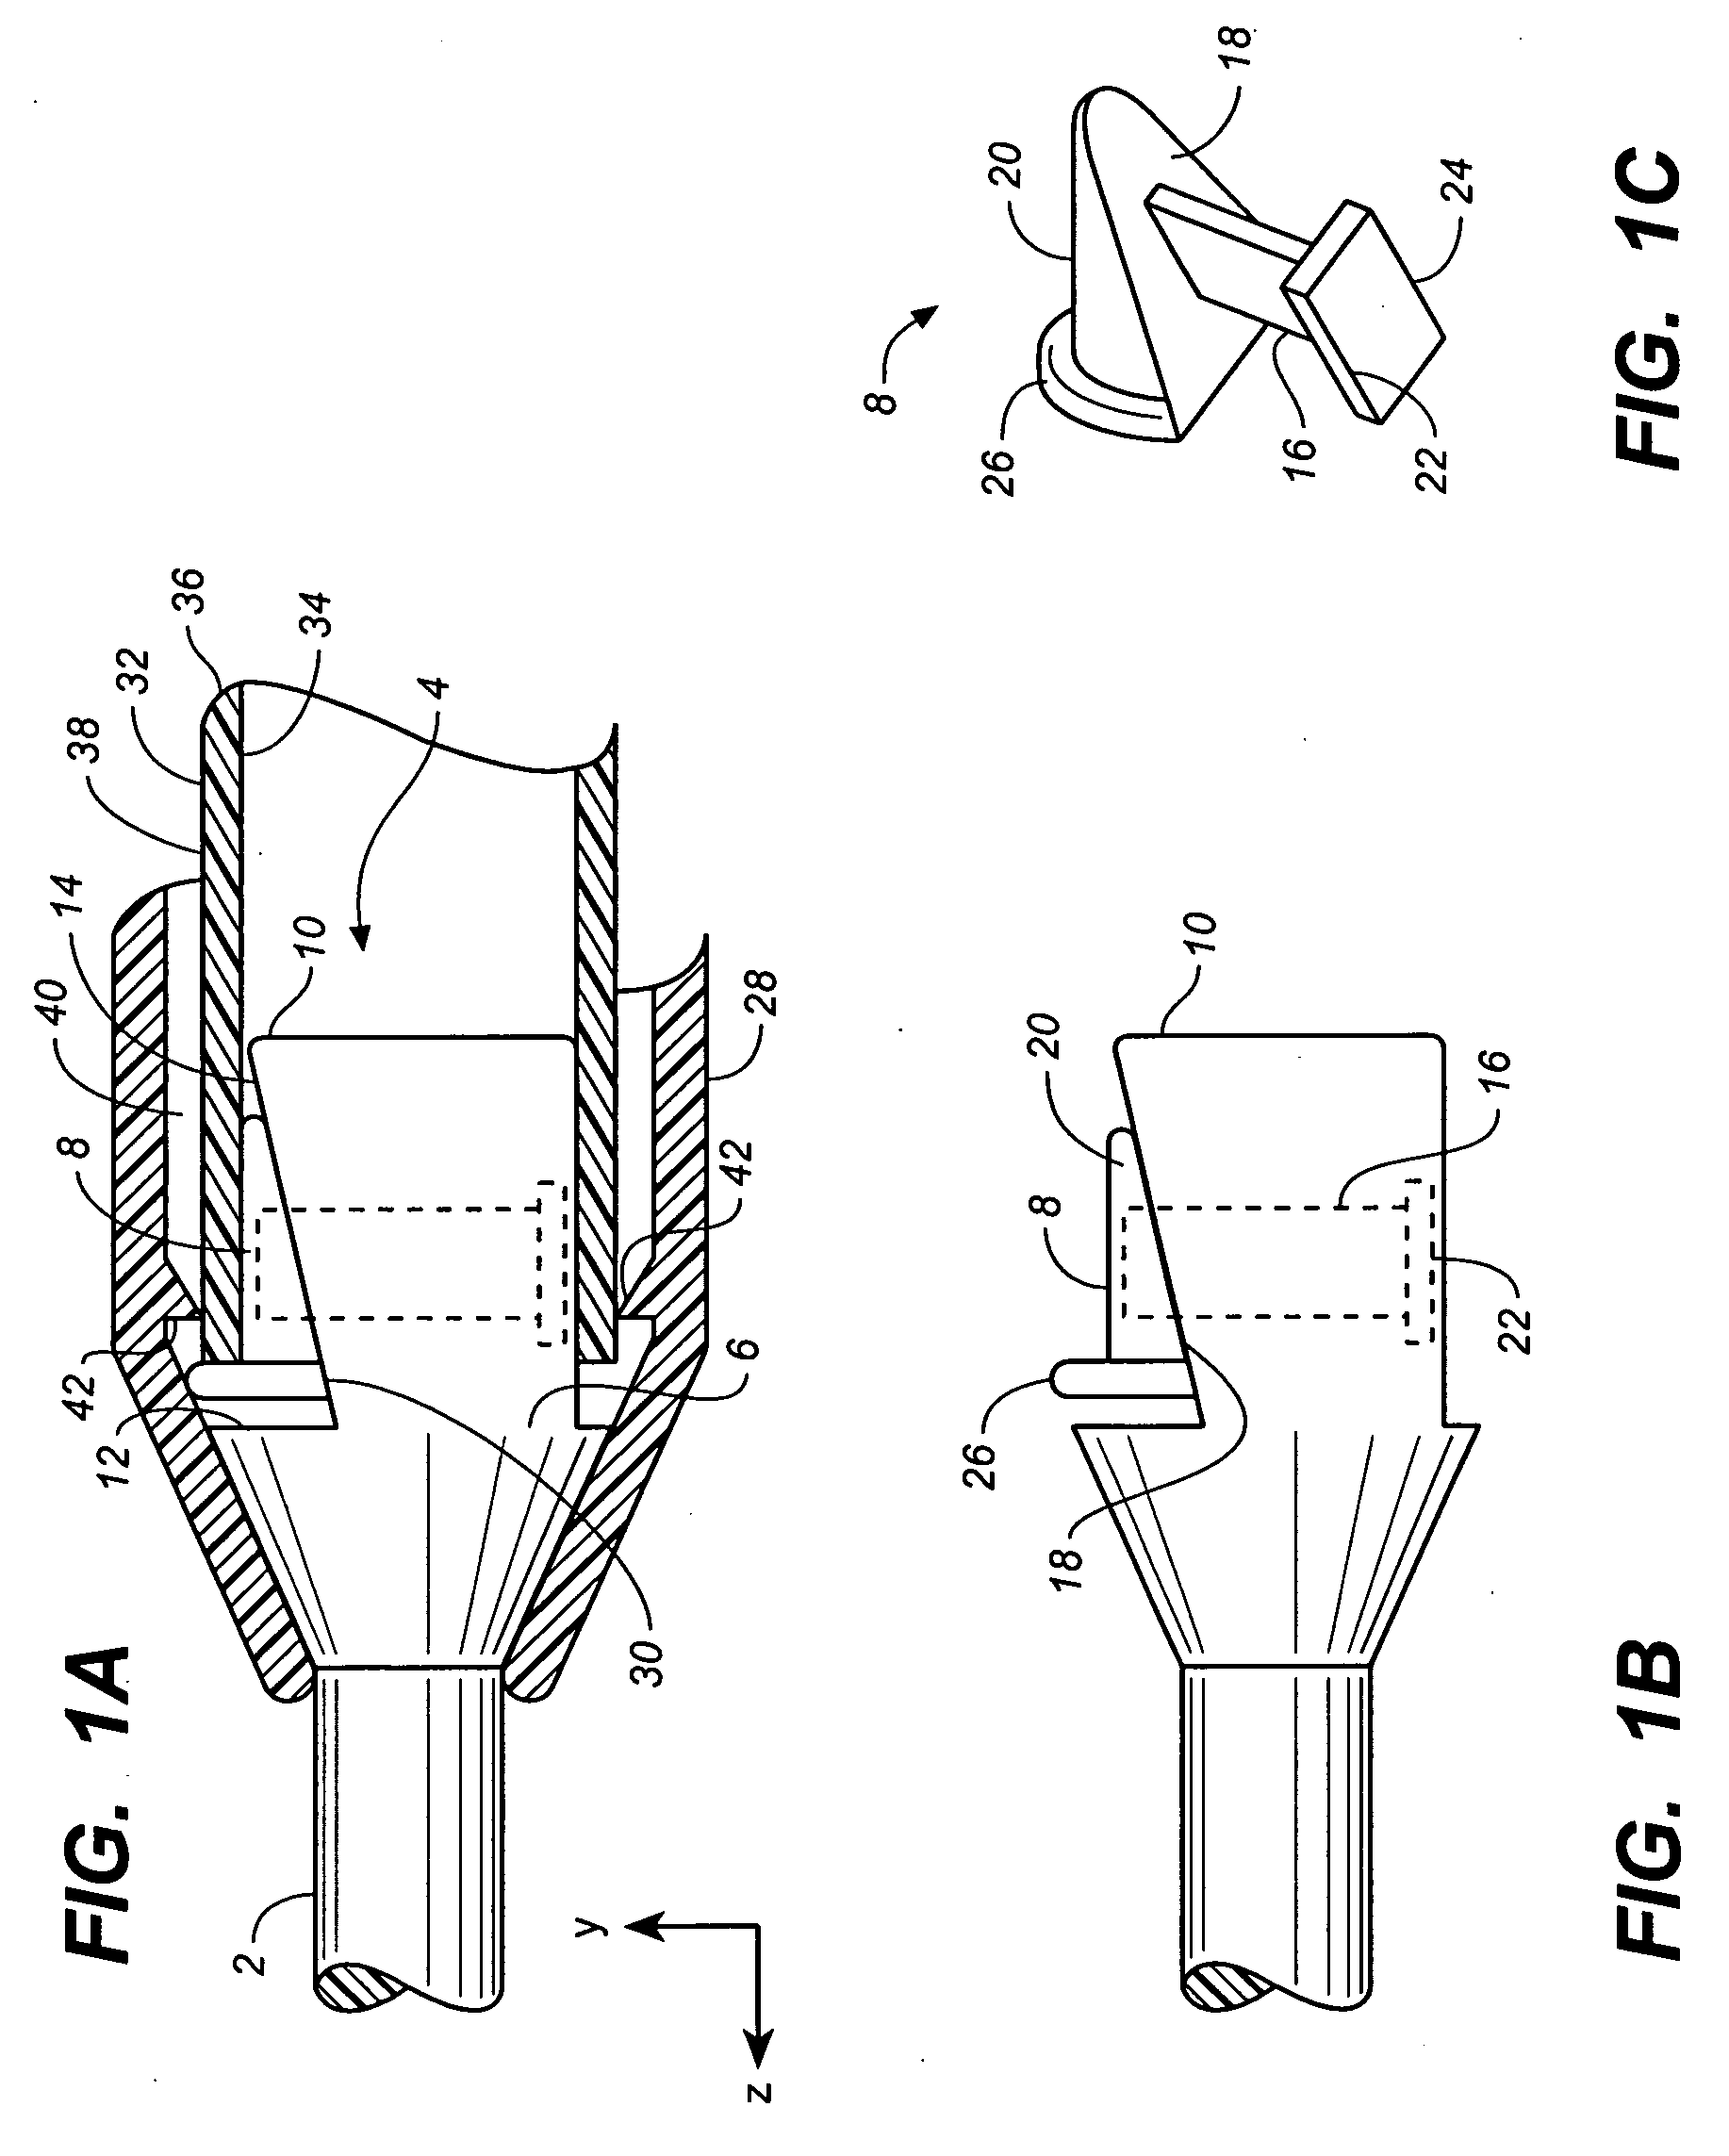 Tunneler with an expandable attachment mechanism